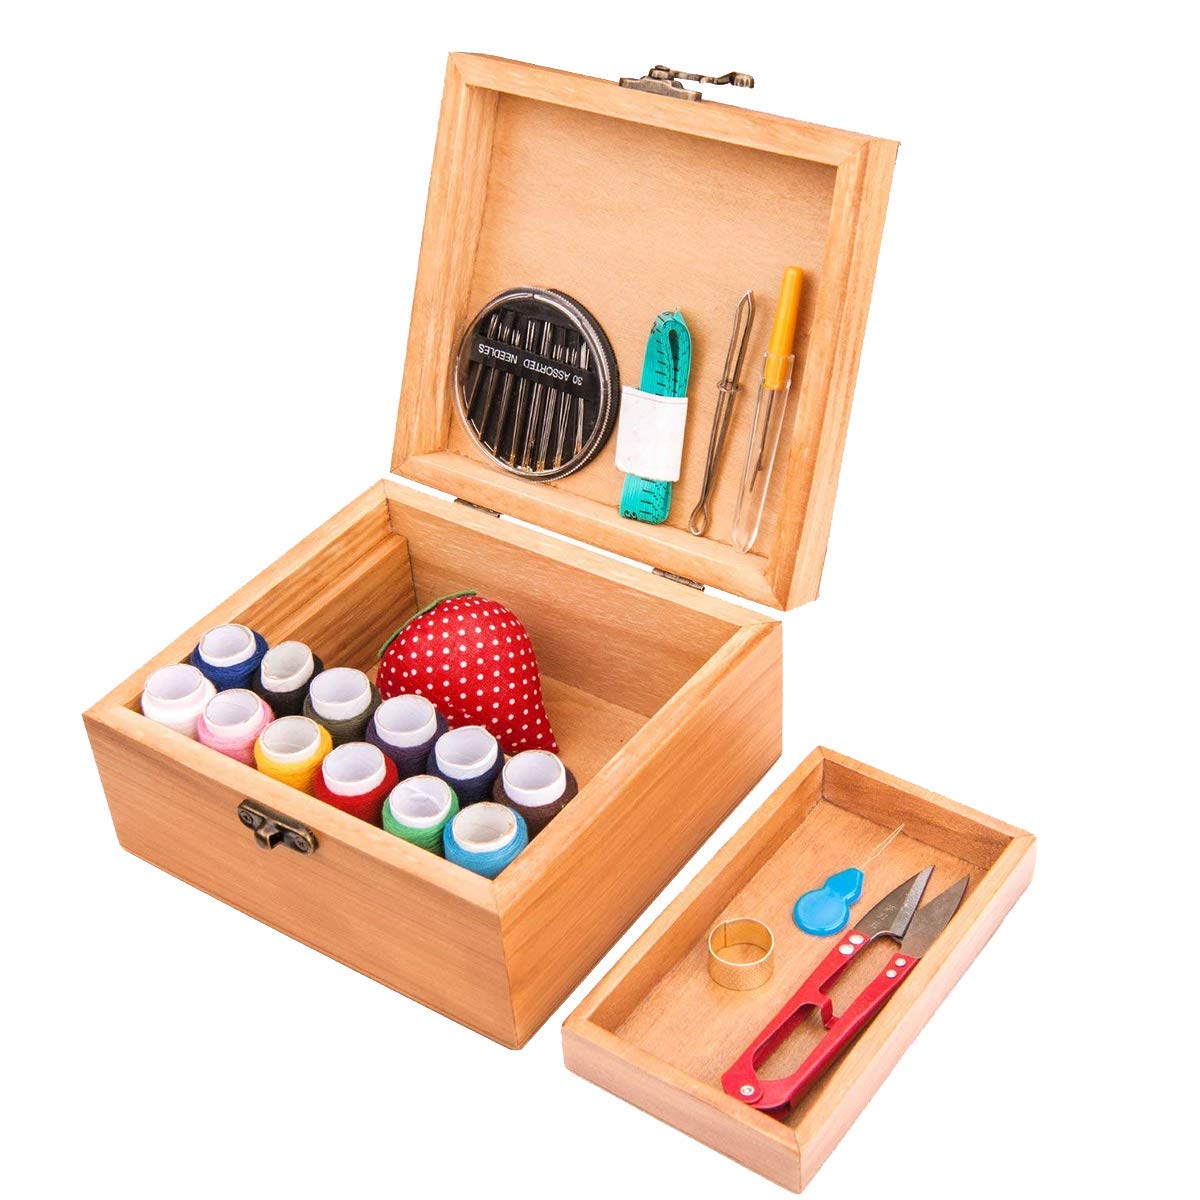 Wooden Sewing Basket with Sewing Kit Accessories,Sewing Box